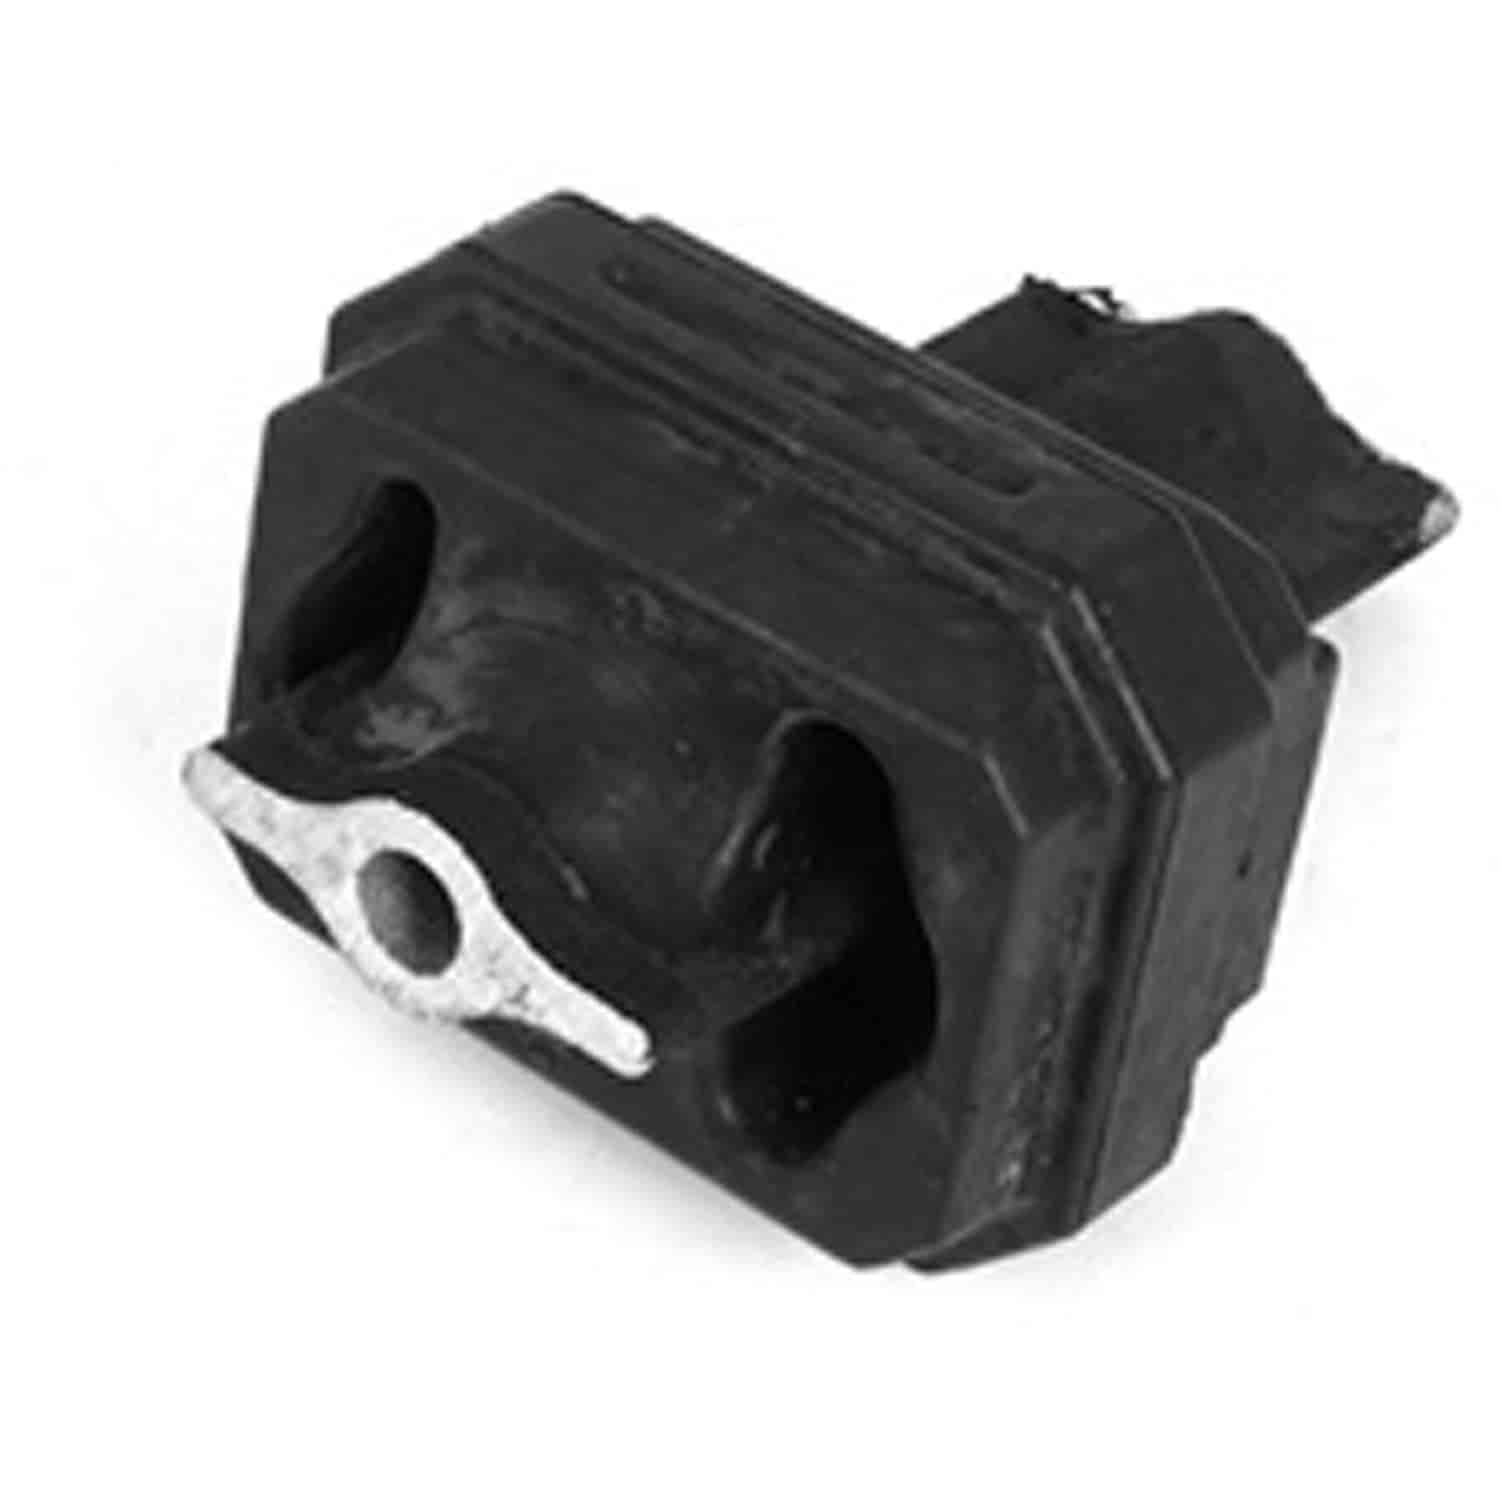 Replacement engine mount from Omix-ADA, Fits left or right side on 3.8L engines found in 07-11 Jeep Wrangler